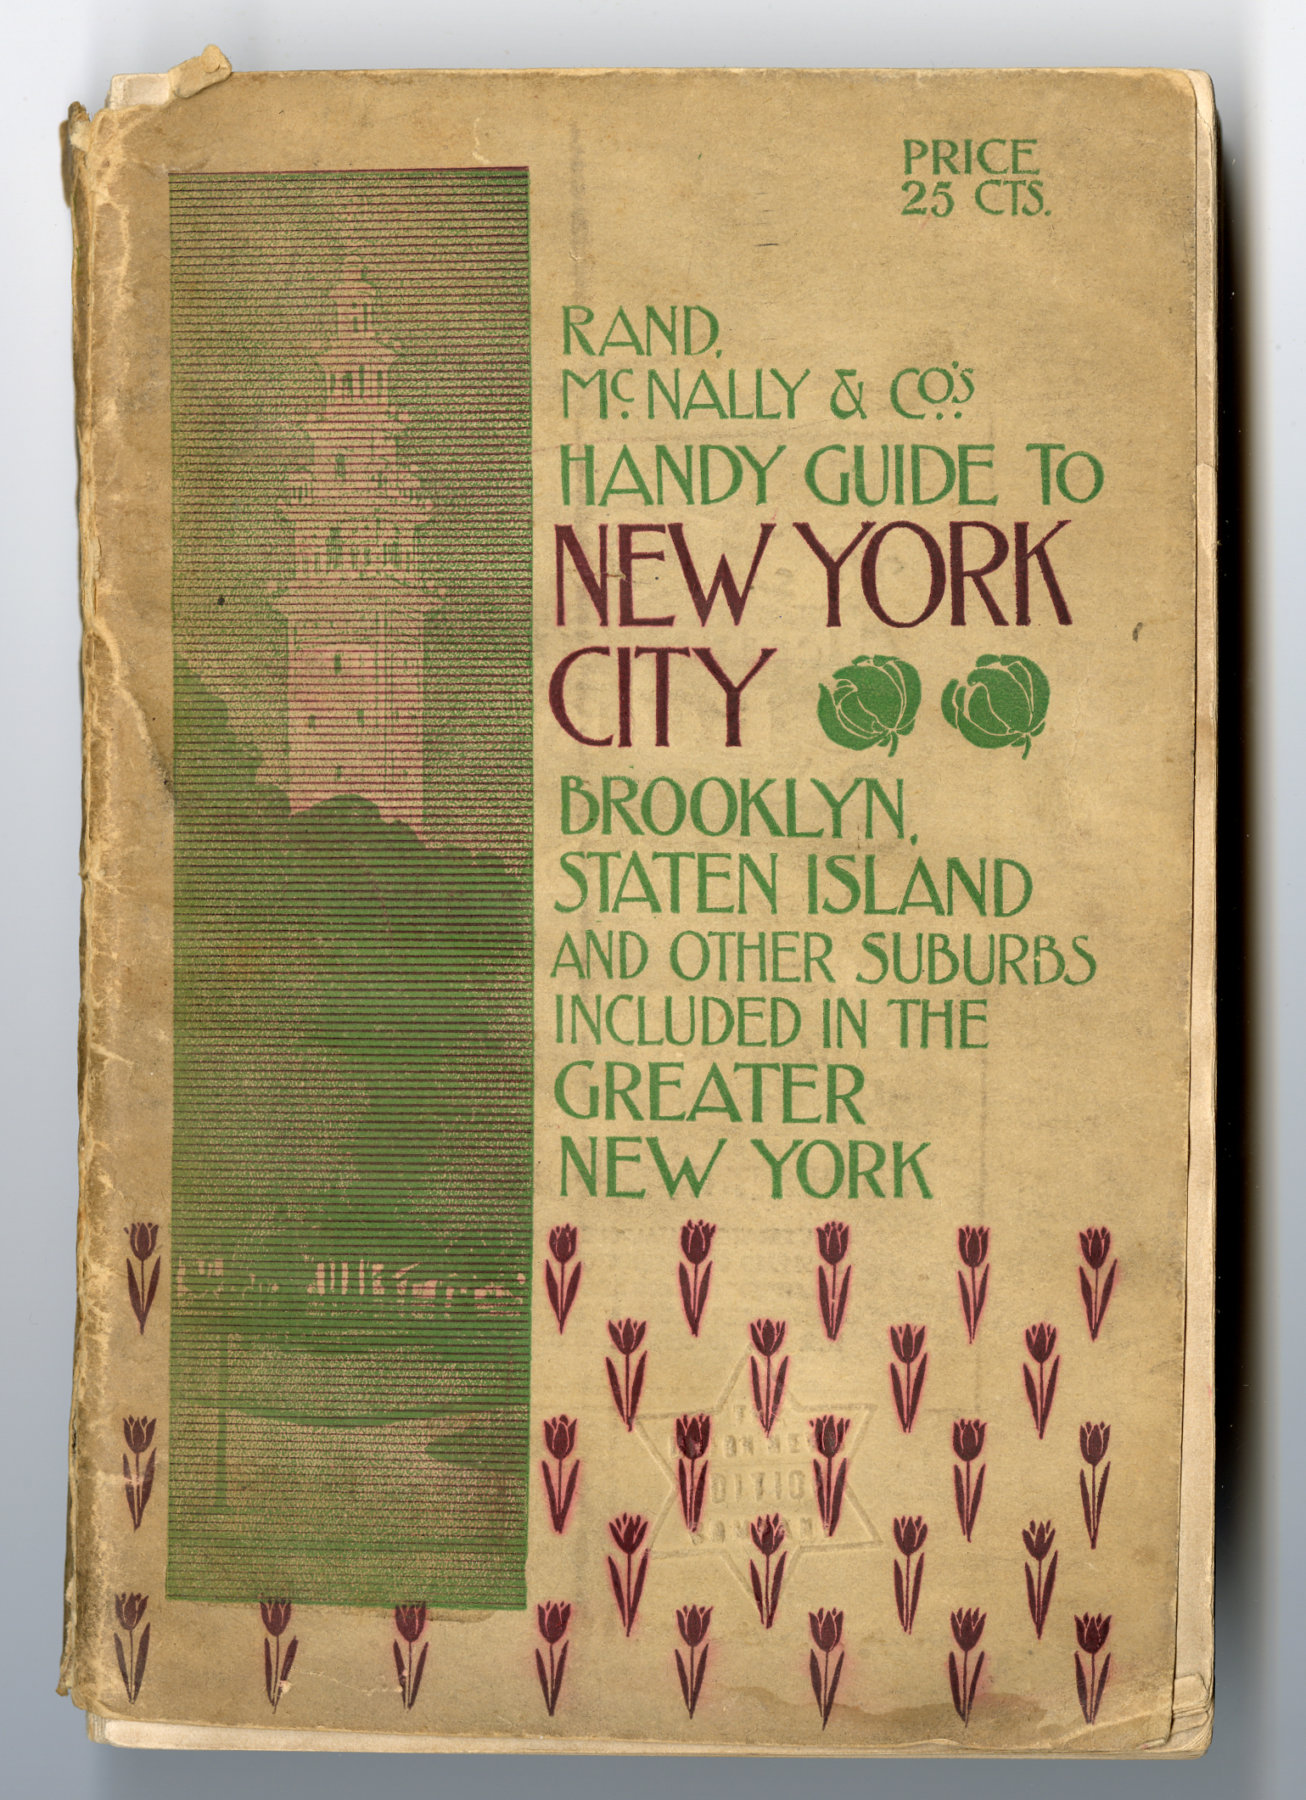 Cover of the Rand McNally & Company's Handy Guide to New York City: Brooklyn, Staten Island and other suburbs included in the Greater New York (probably includes Queens, maybe). Courtesy of Roy Delbyck. Museum of Chinese in America (MOCA) Collection.